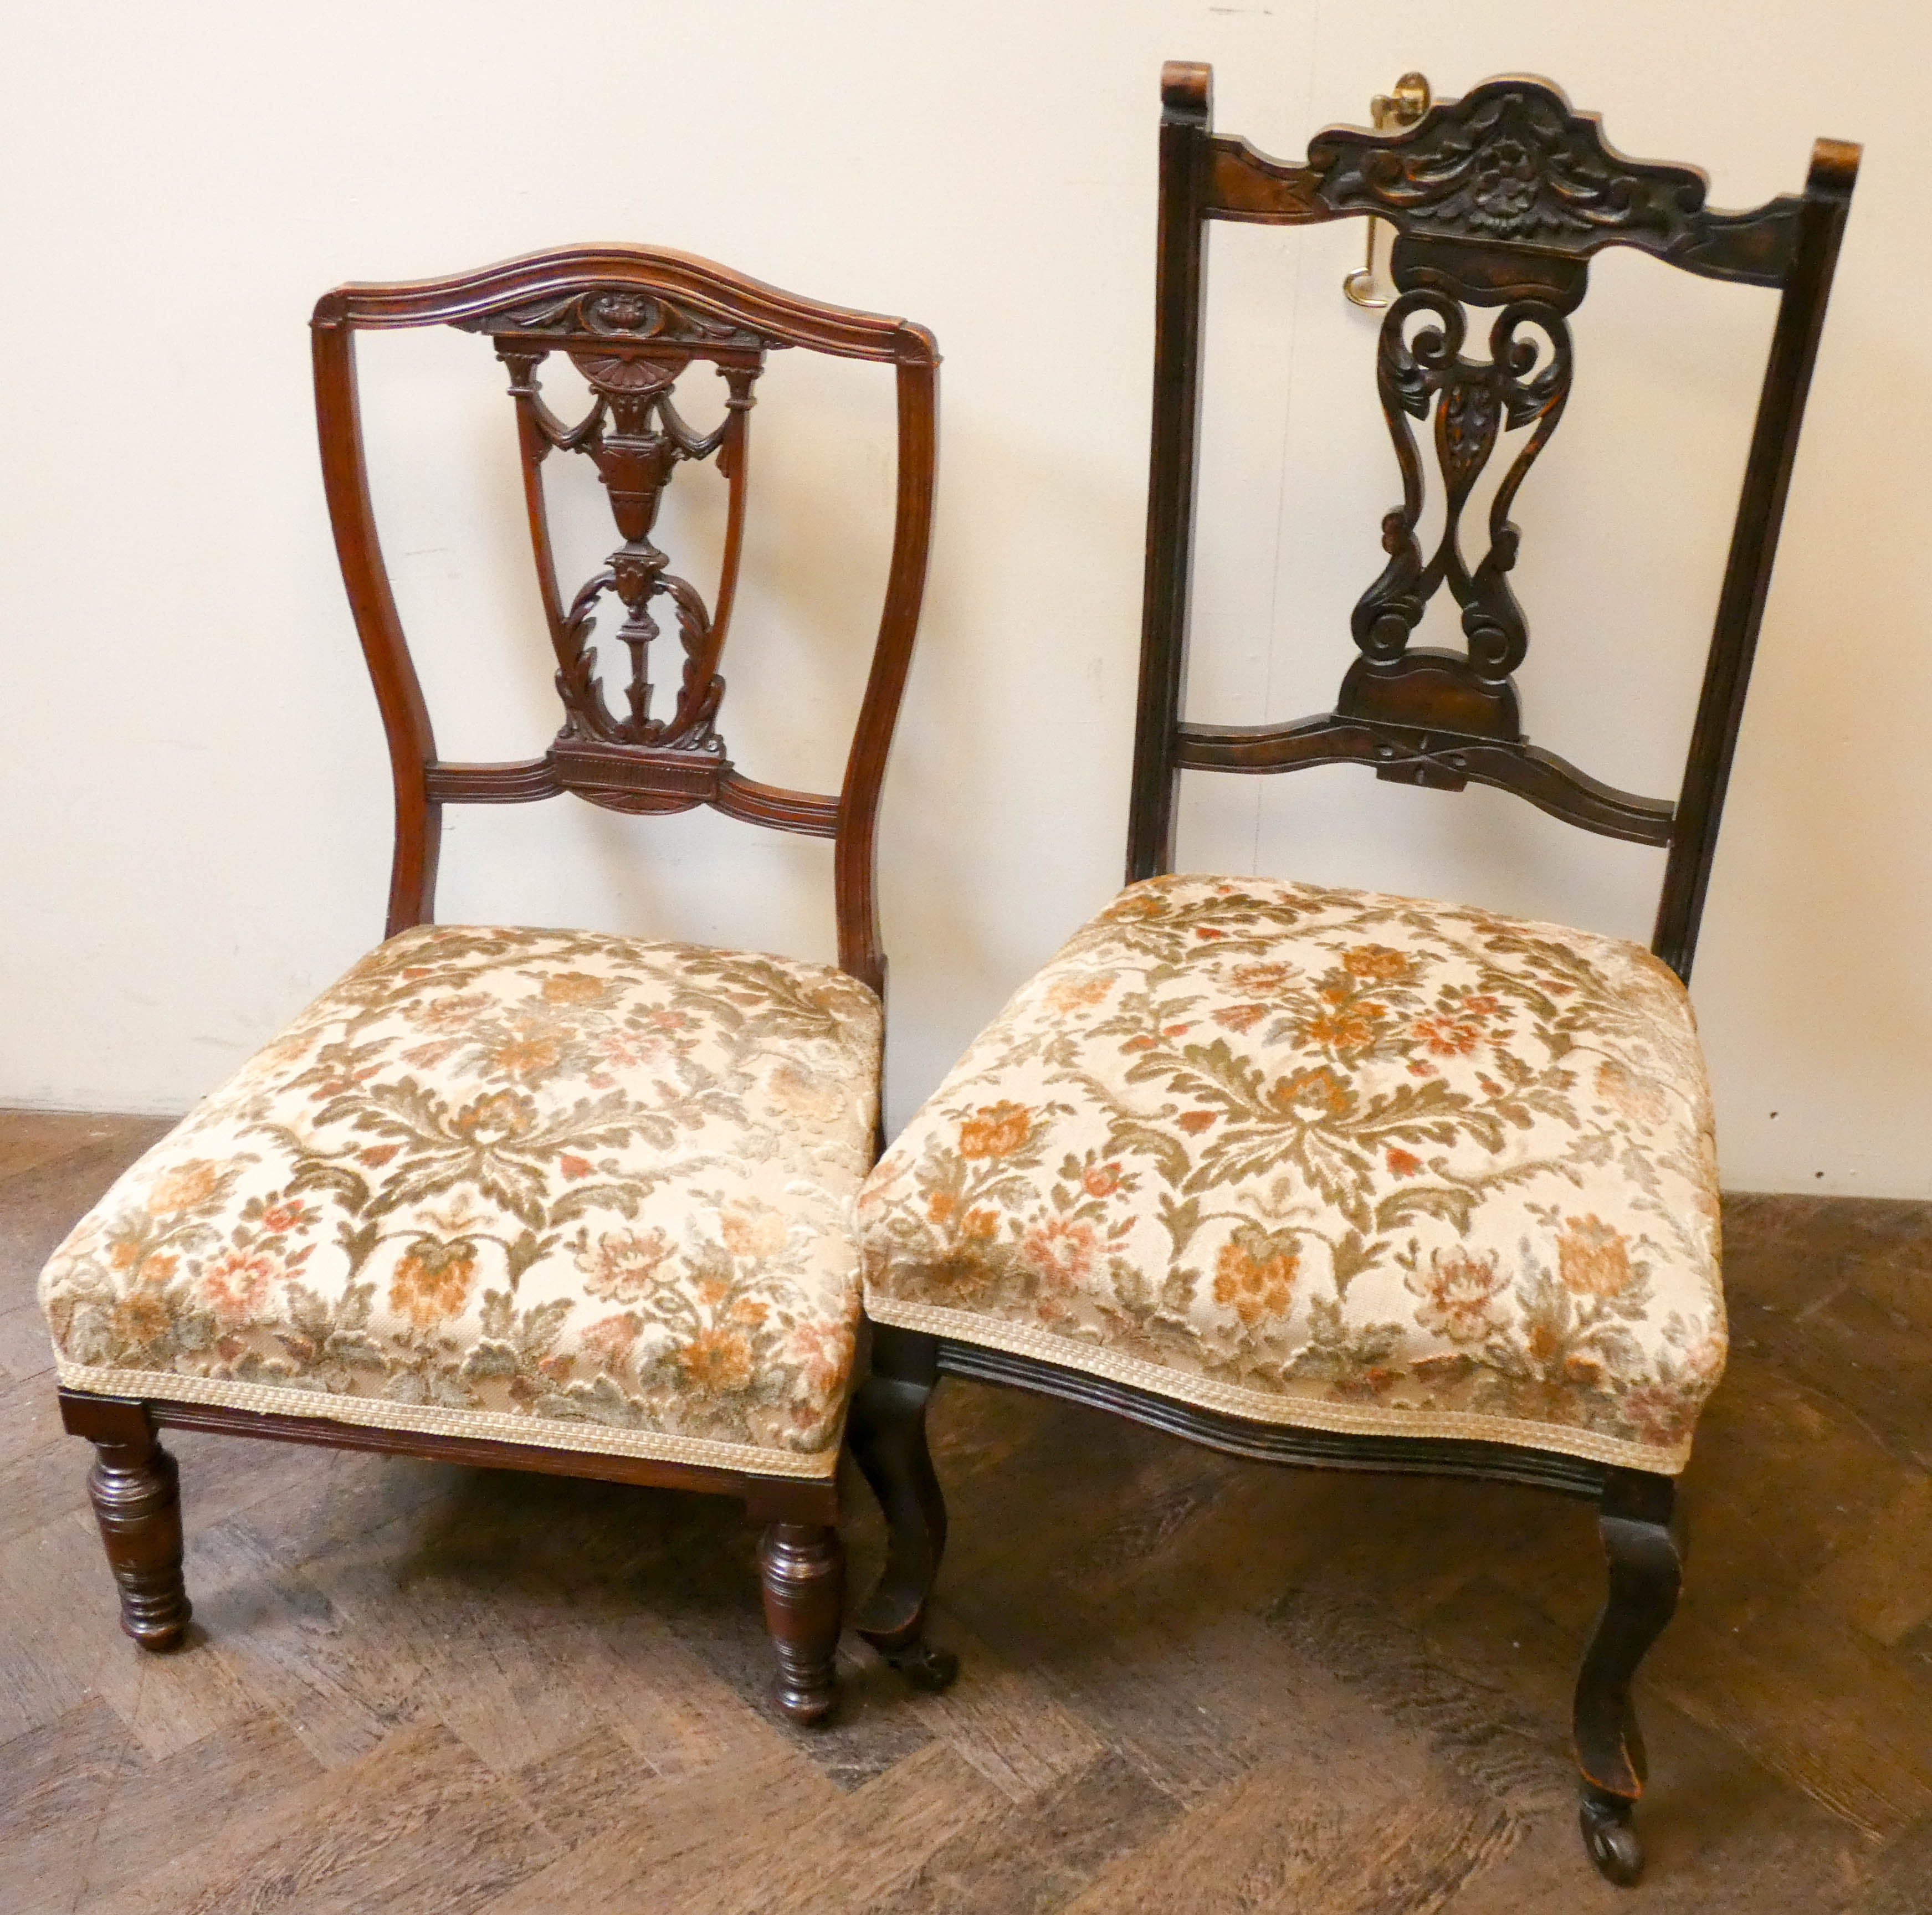 Two Edwardian bedroom chairs with floral fabric to the seats - Image 2 of 2